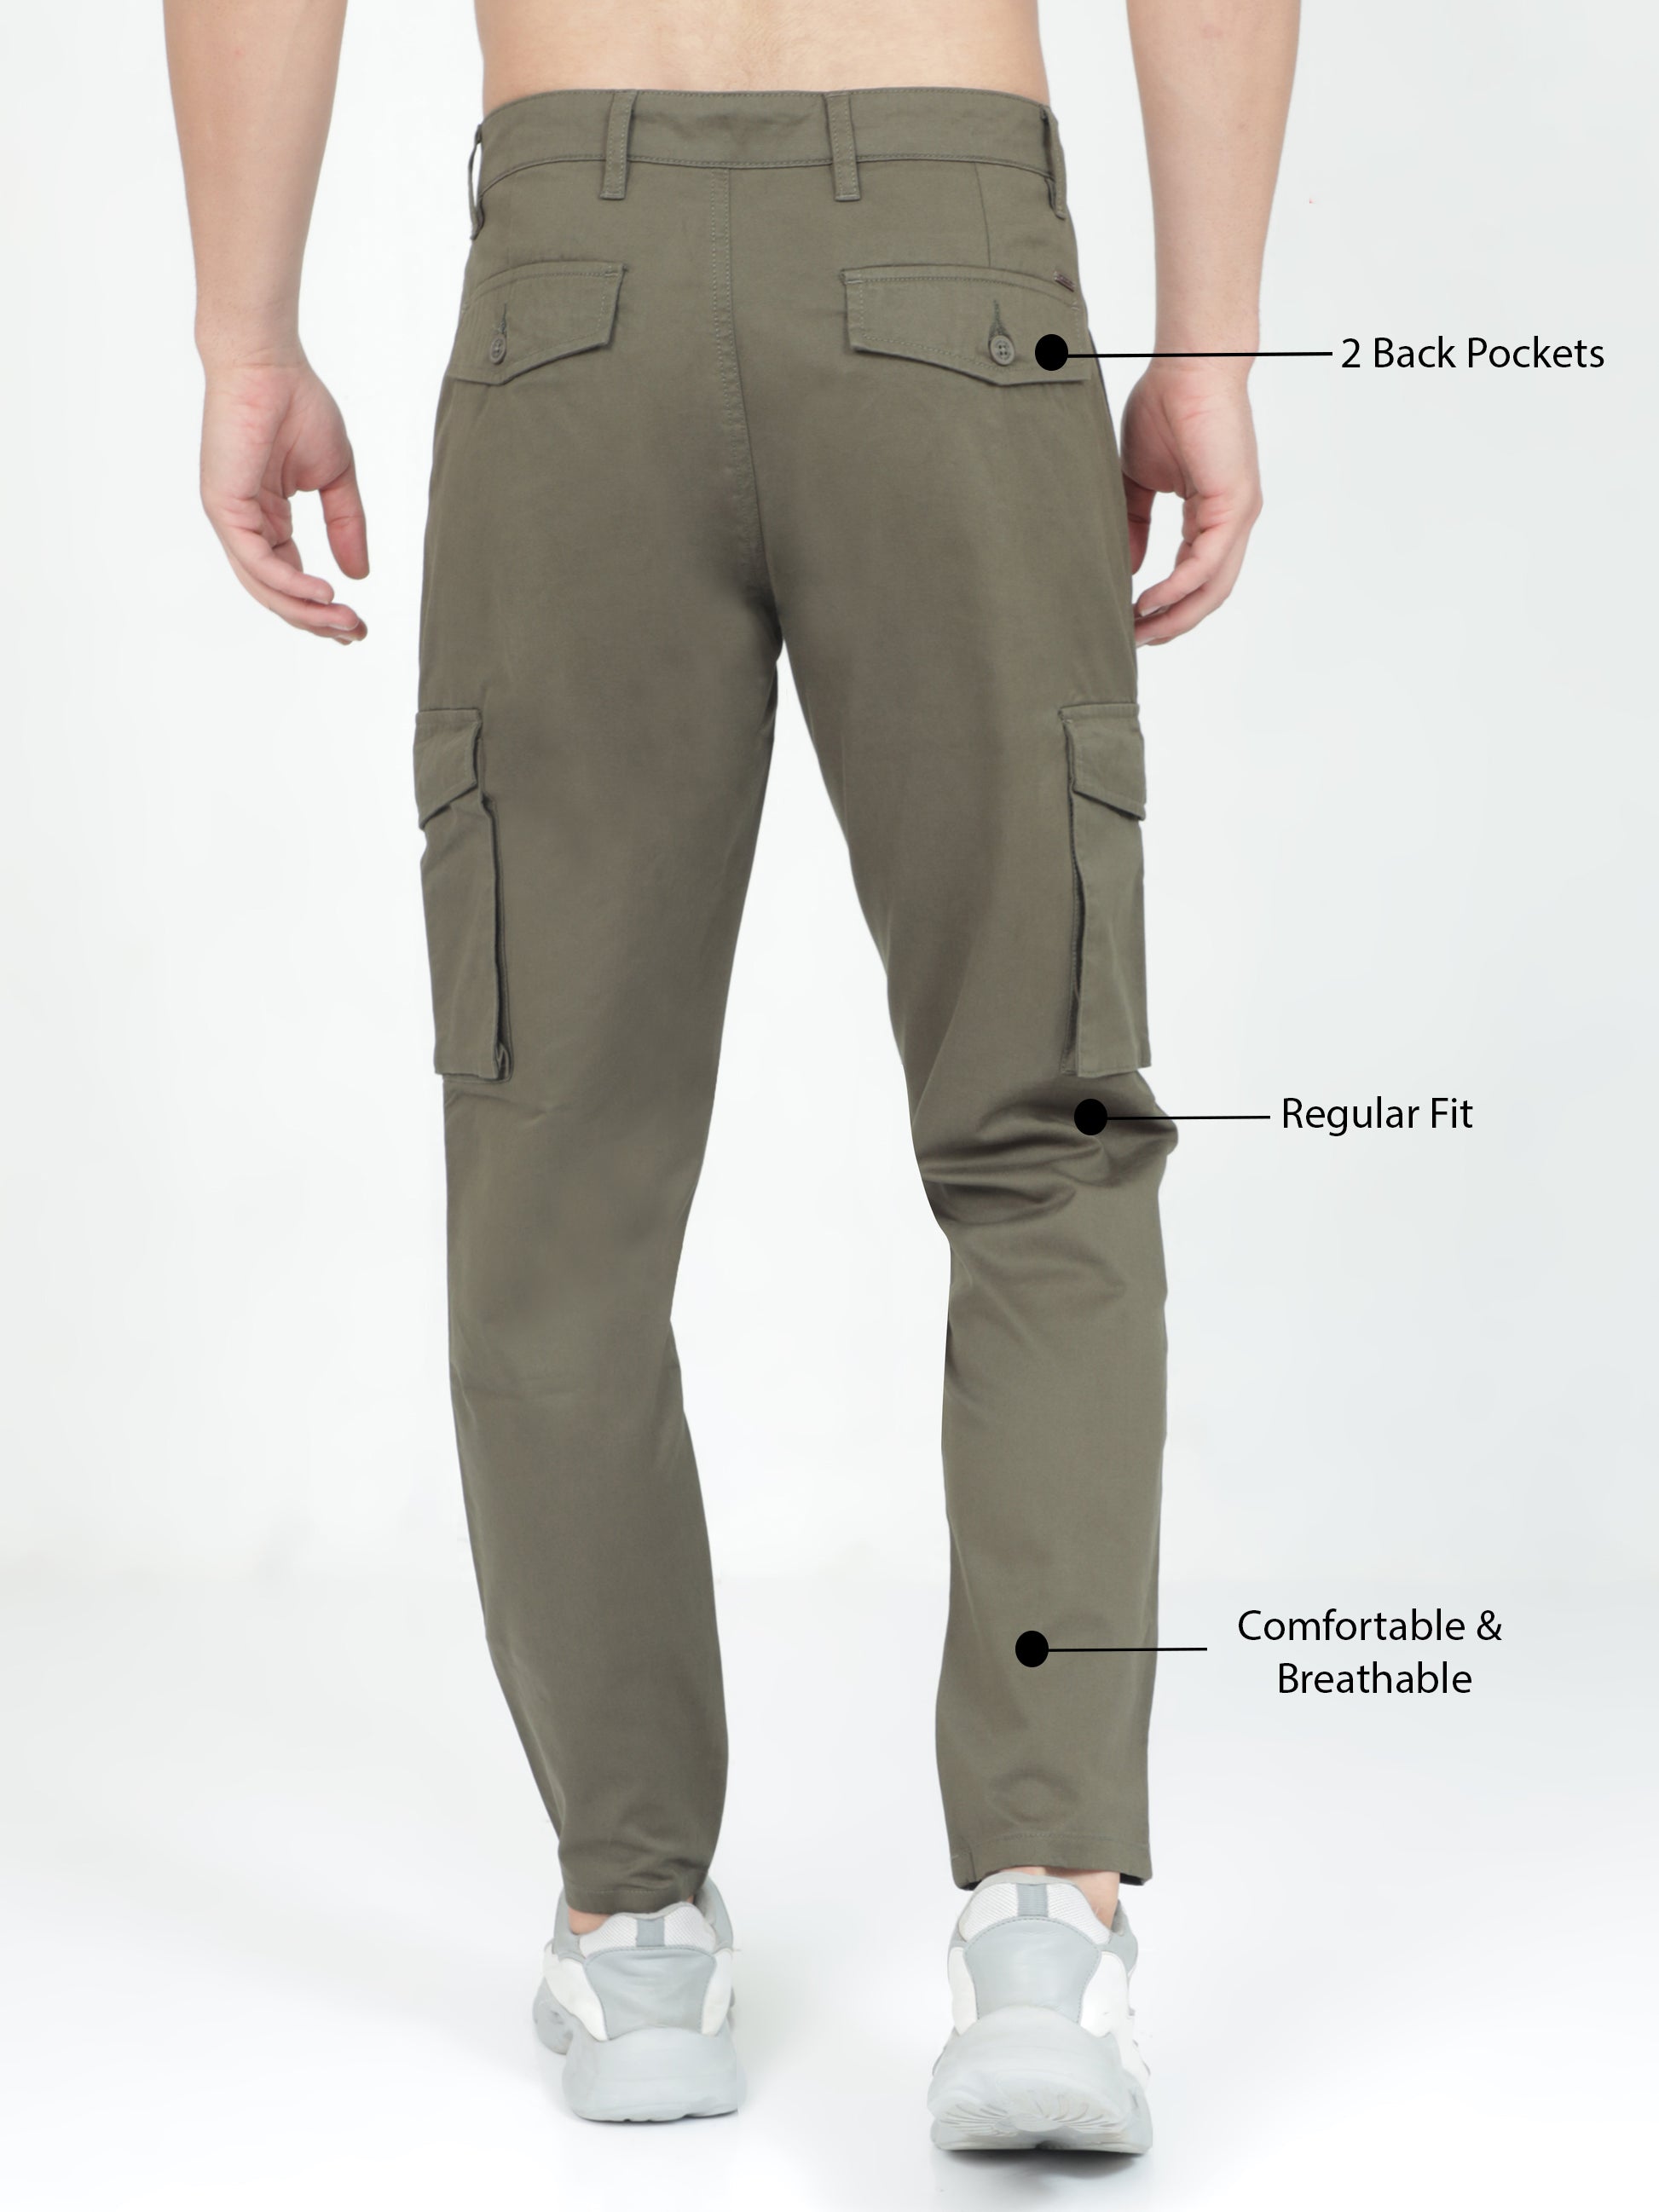 Men's Lee Extreme Comfort MVP Straight Fit Cargo Pants 32x32 Forest  Performance | eBay